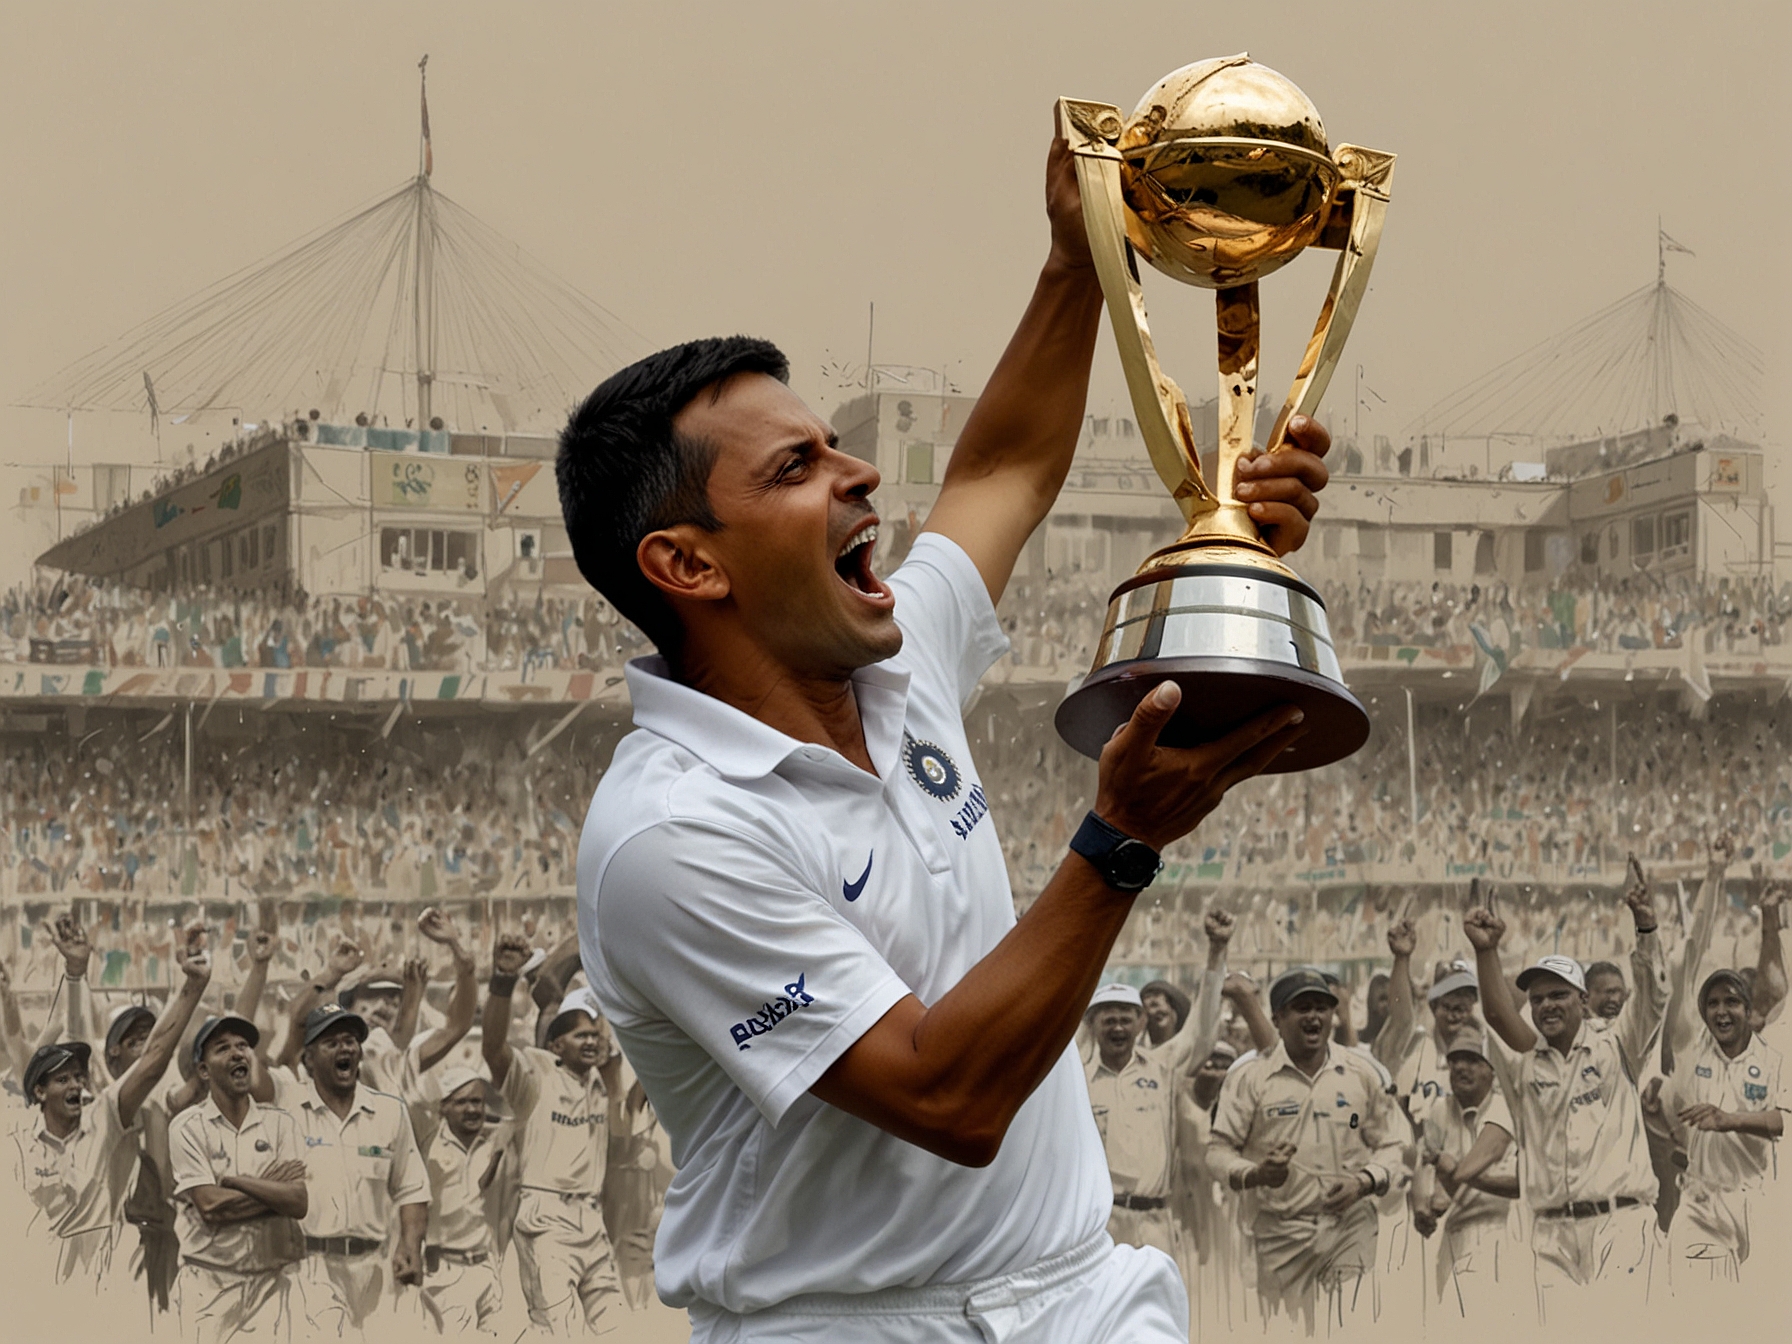 Rahul Dravid, nicknamed 'The Wall', jumps in joy and pumps his fists in a rare display of exuberance after Virat Kohli hands him the World Cup trophy, symbolizing India's triumph.